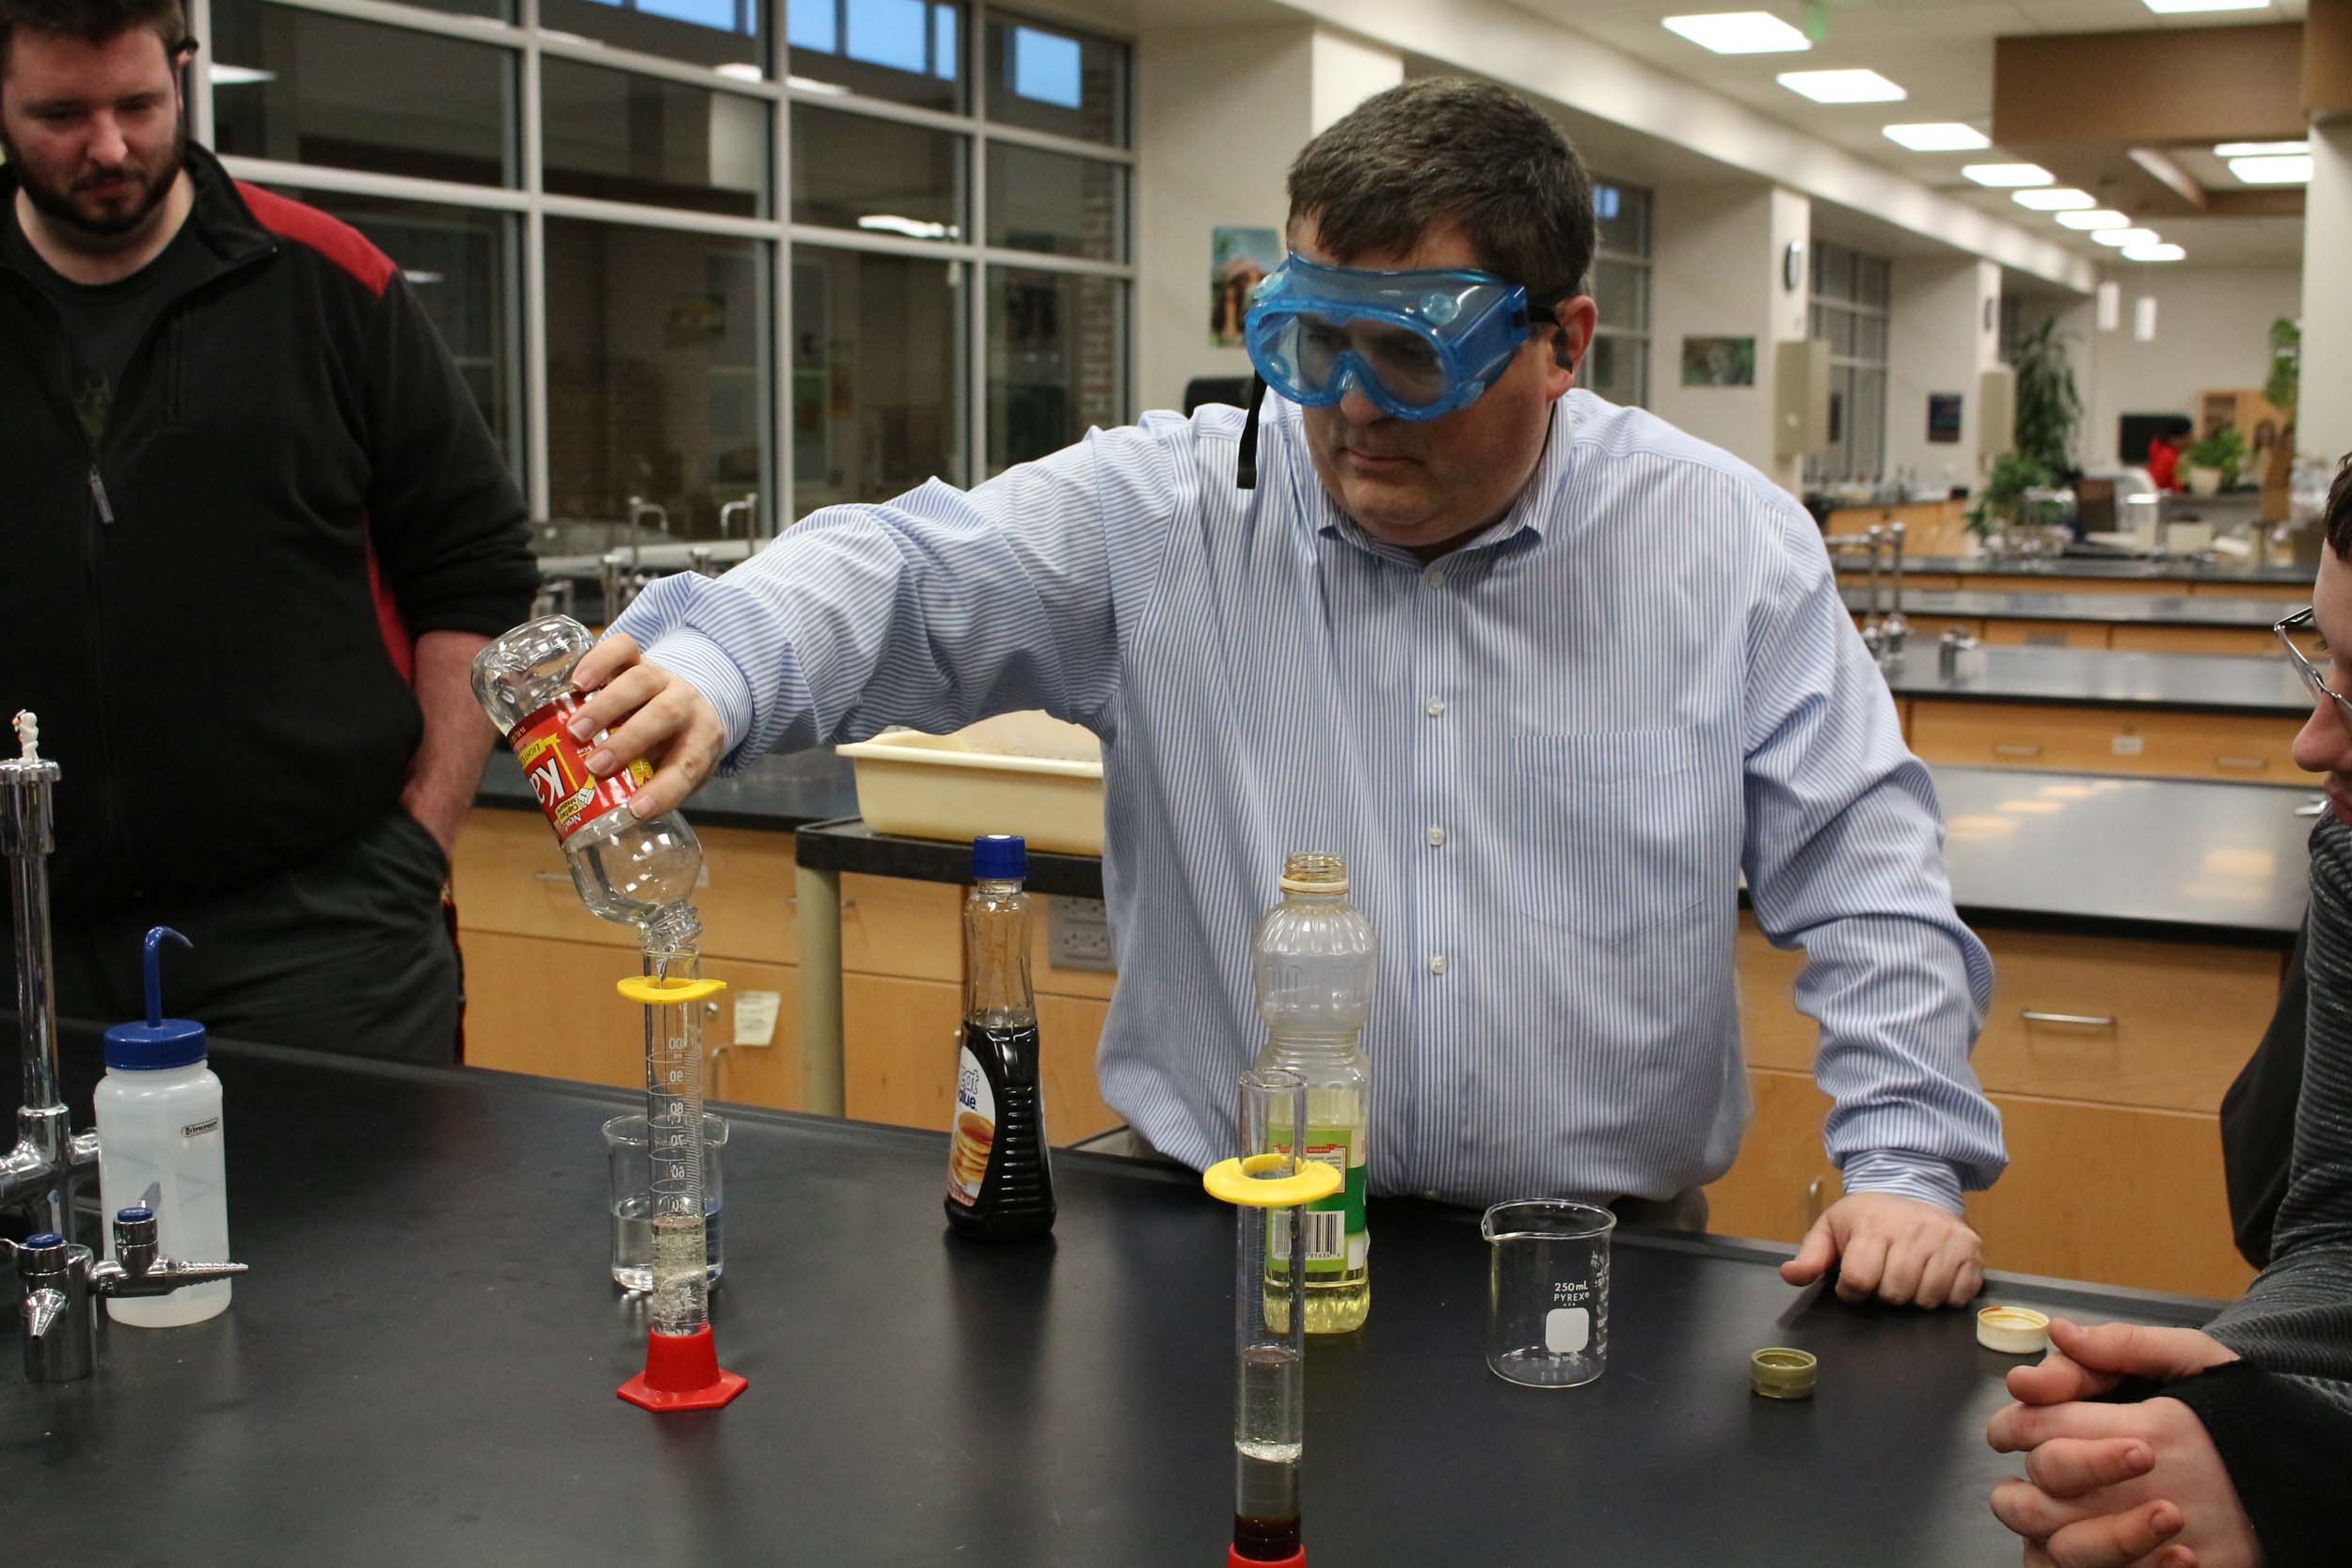 Science teacher Mr. Elmer Sanders mixes together substances to show the differences of density for a chemistry experiment on Jan. 22.